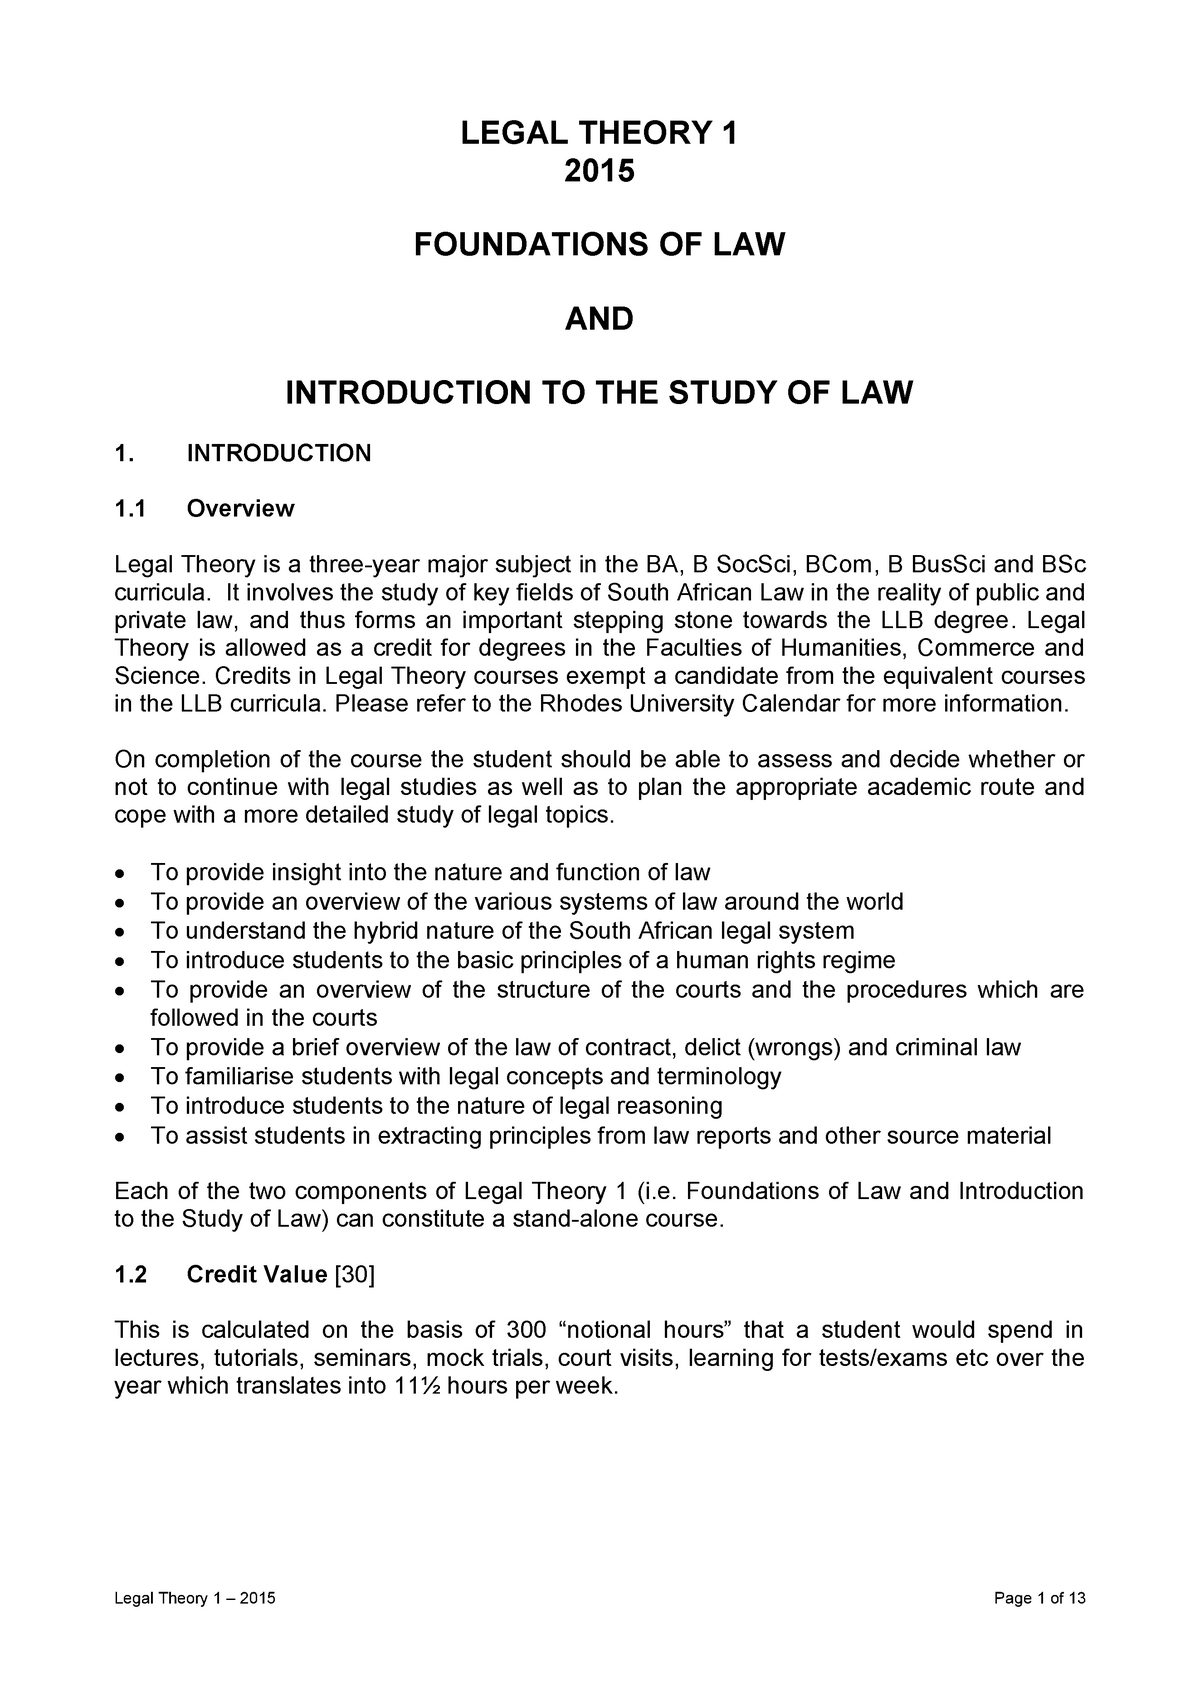 Introduction to LawCourse Outline for Law students LEGAL THEORY 1